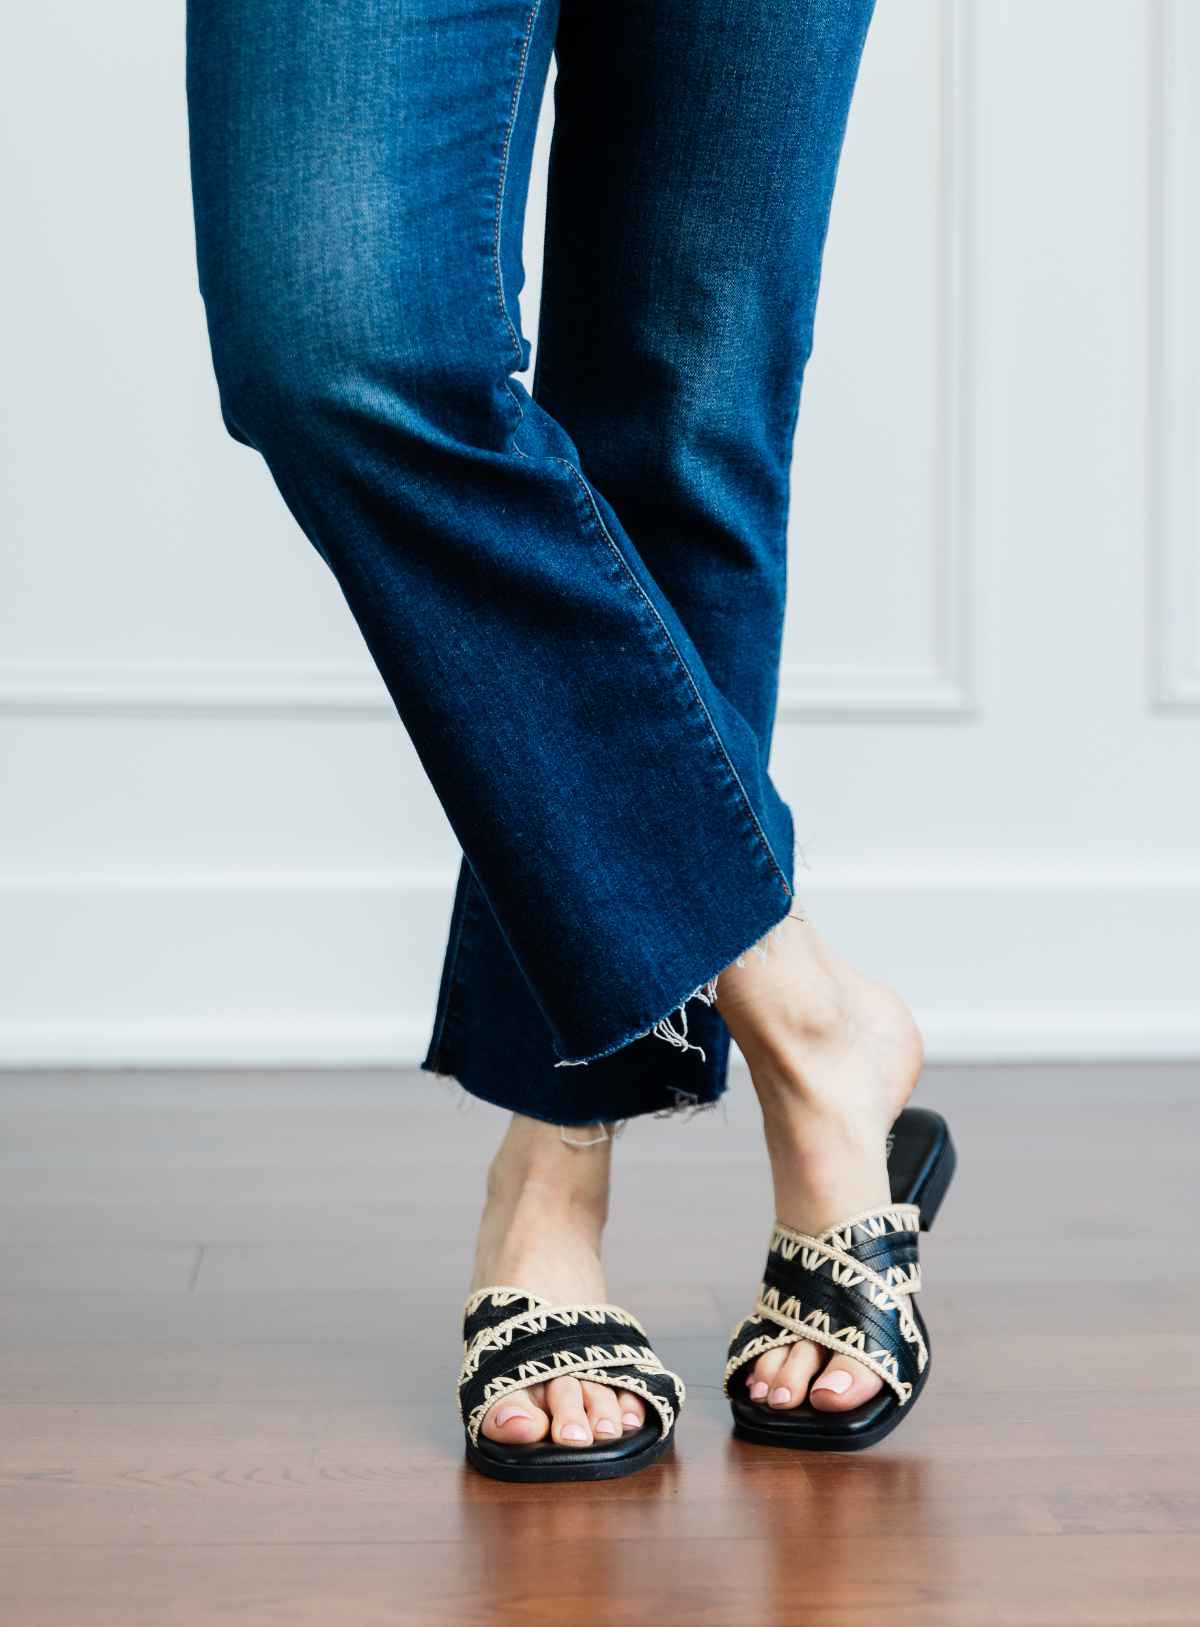 Cropped view of woman's legs wearing black criss cross low slides with raffia detail and kick flares.